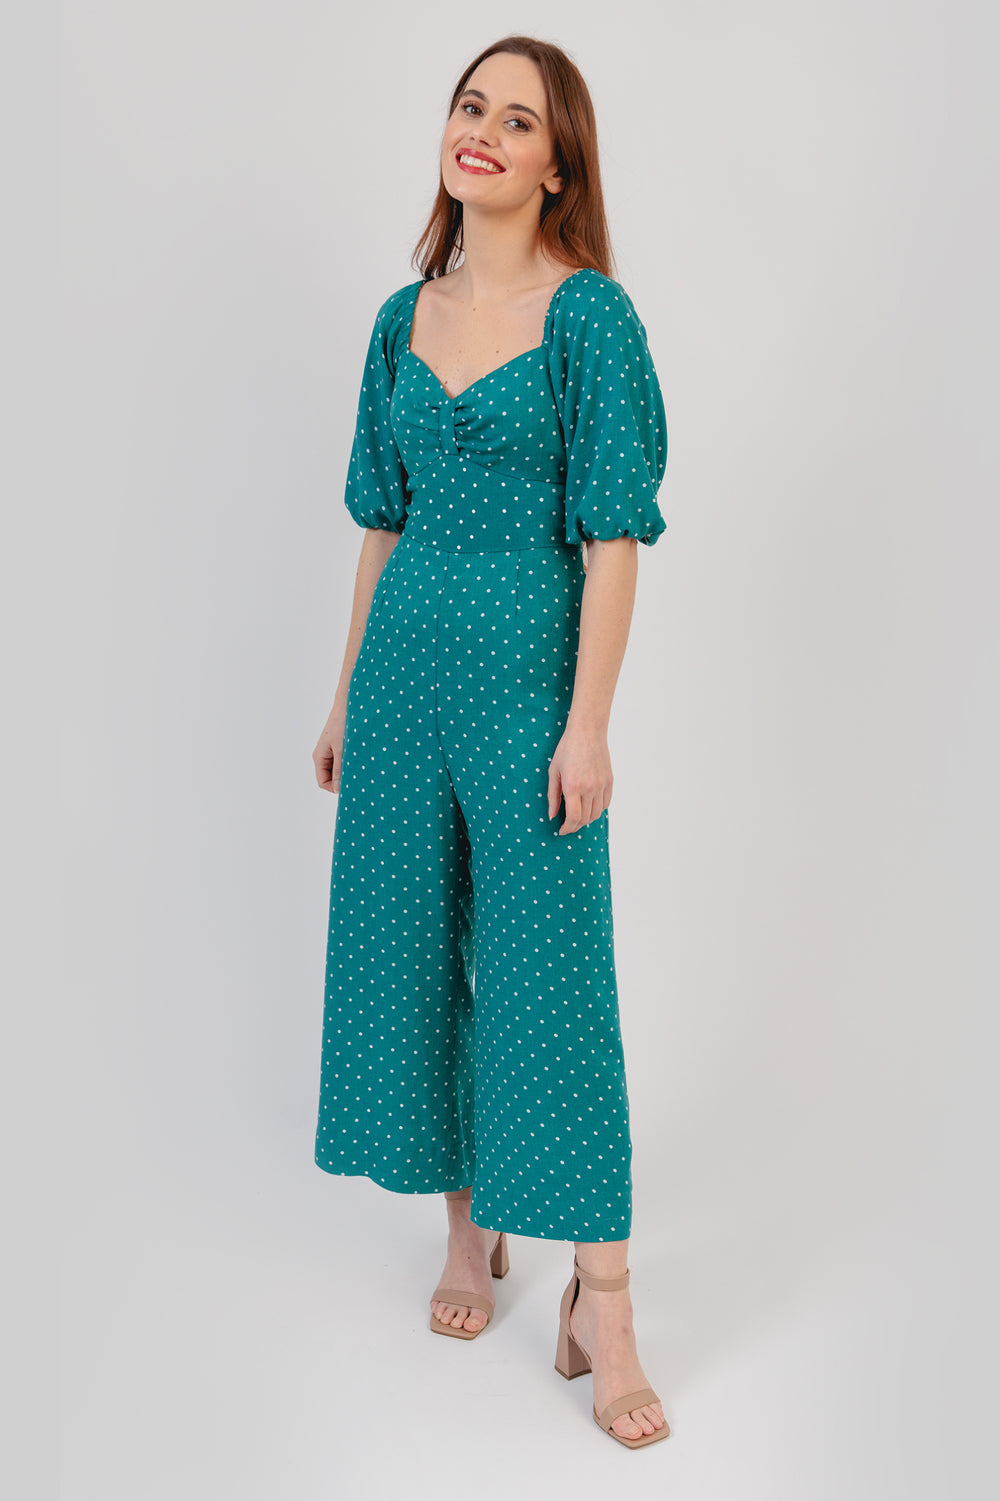 Woman wearing the Adele Jumpsuit sewing pattern from Sew Love Patterns on The Fold Line. A jumpsuit pattern made in viscose, tencel, crepe, velvet, satin rayon and cotton fabrics, featuring a cropped length, short puff sleeves with gathered elastic at the